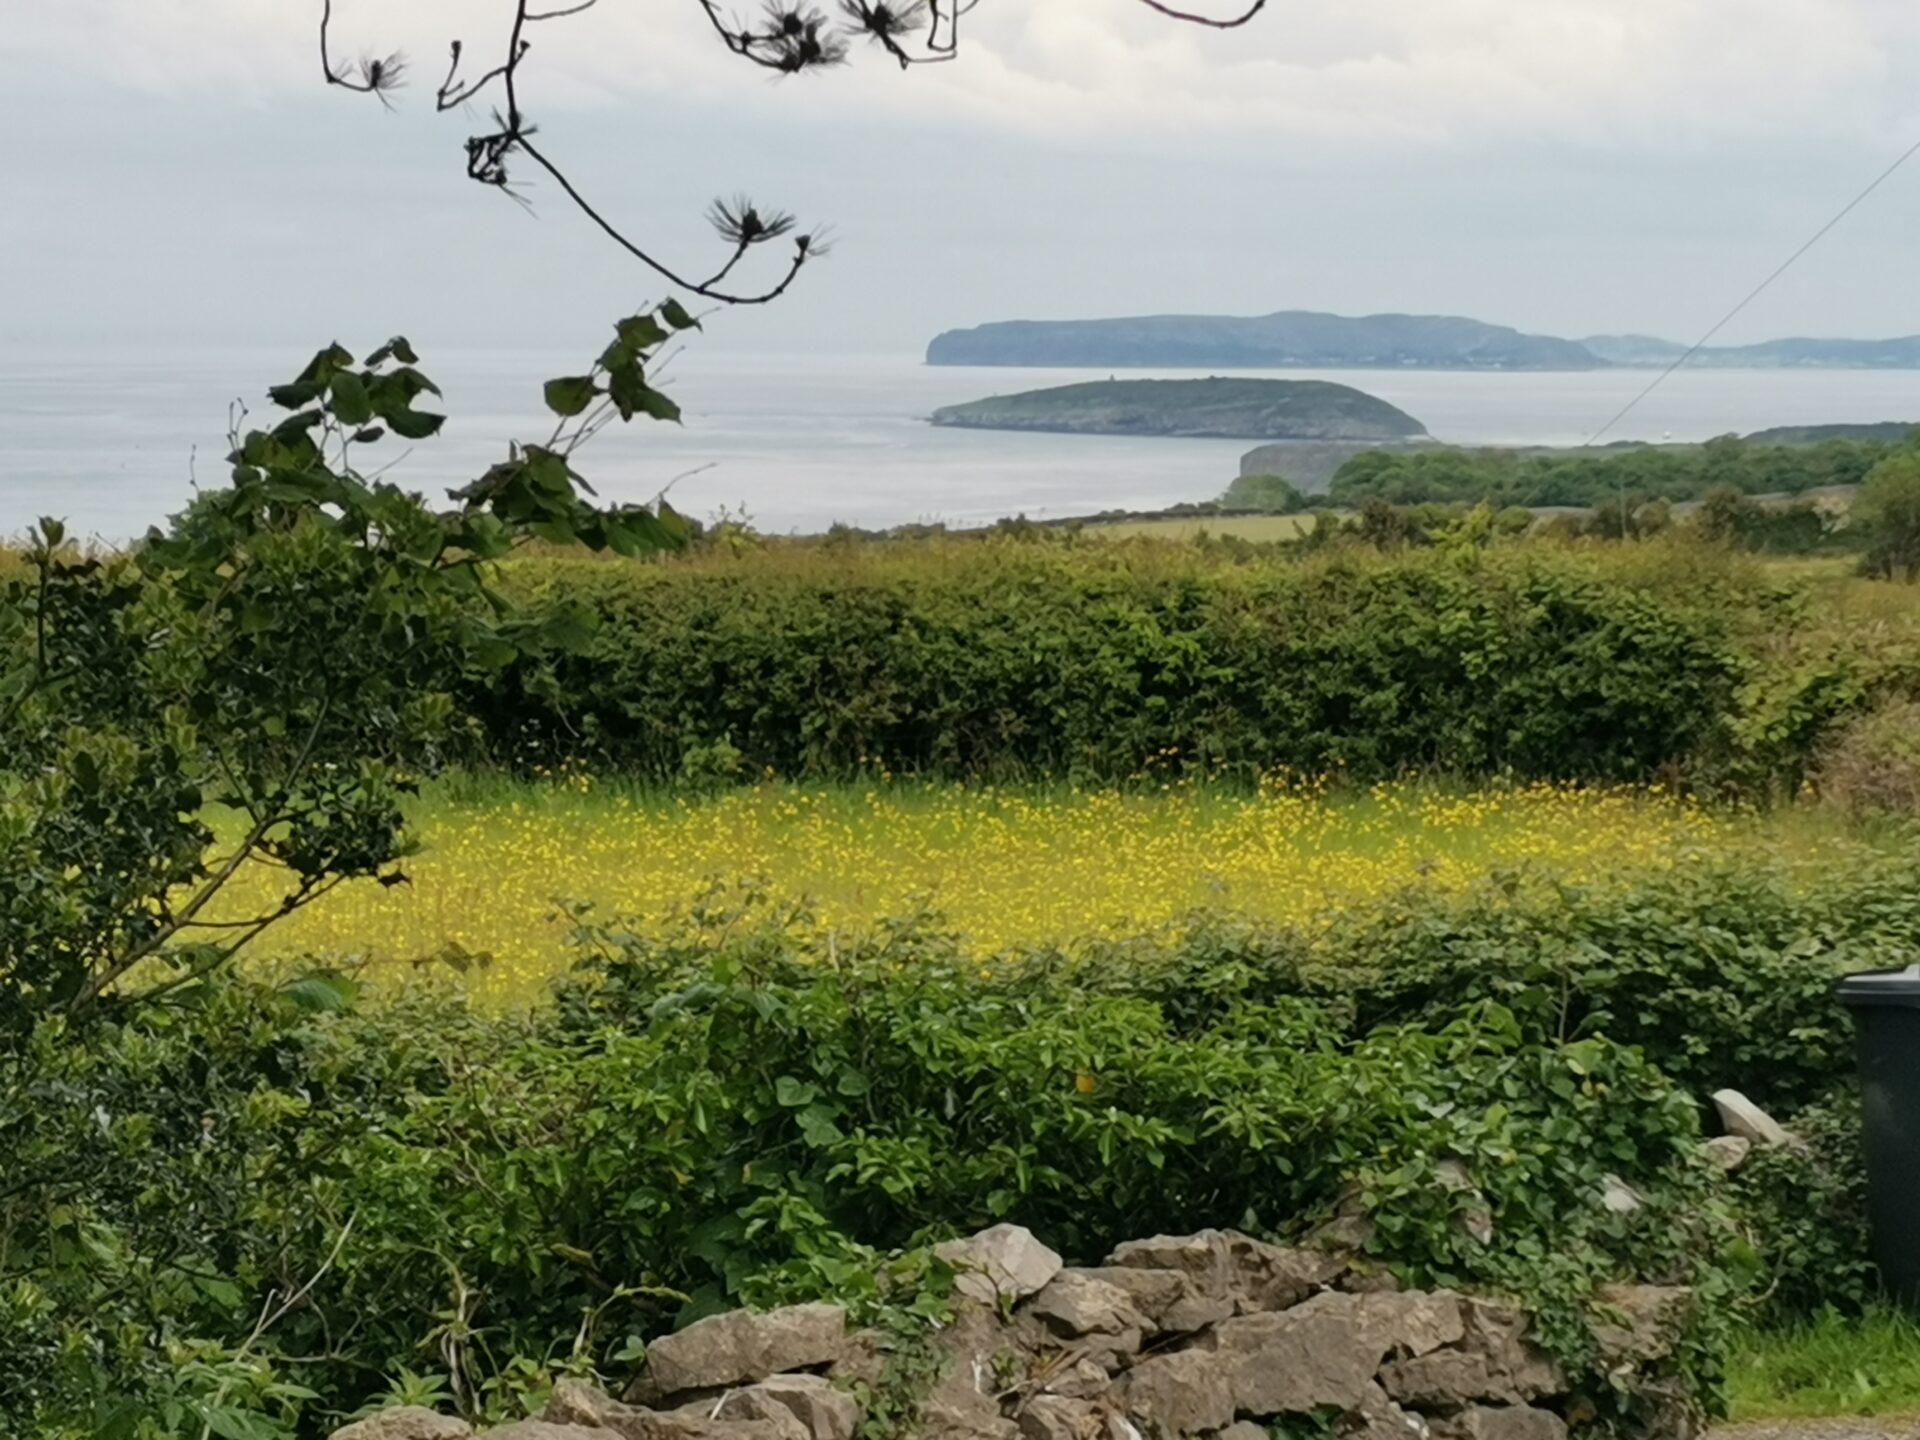 Green fields with yellow flowers and an island beyond.